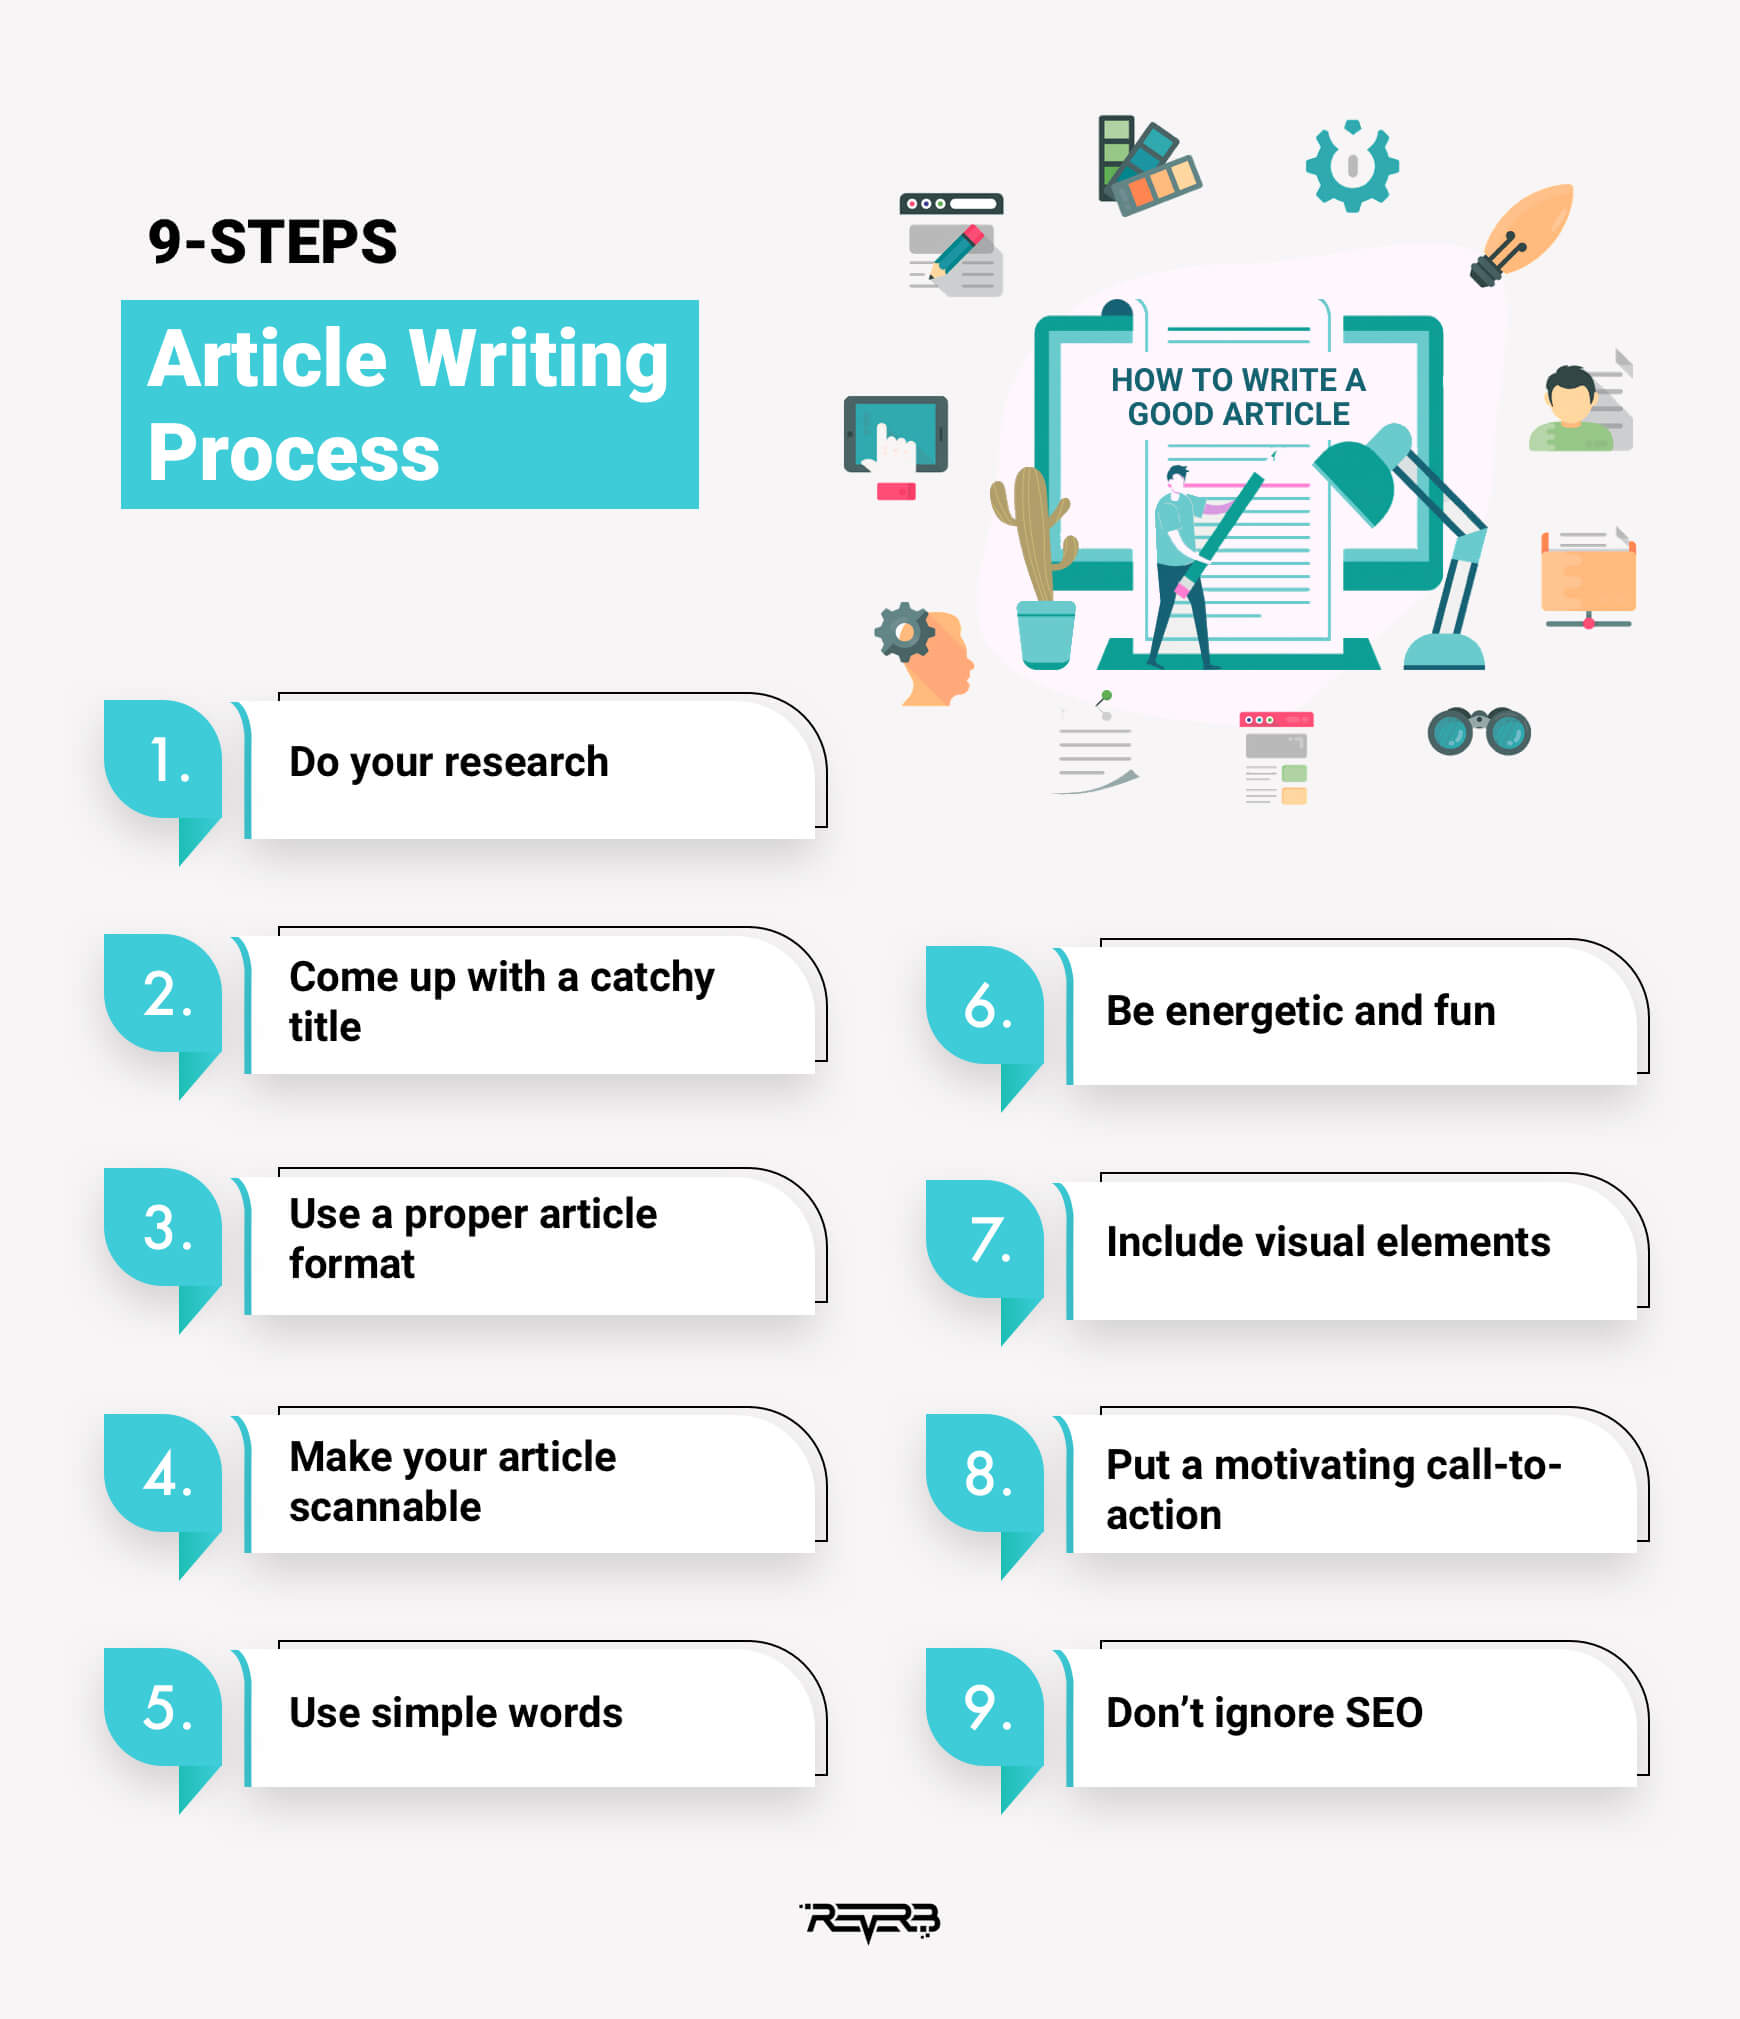 news article writing tips